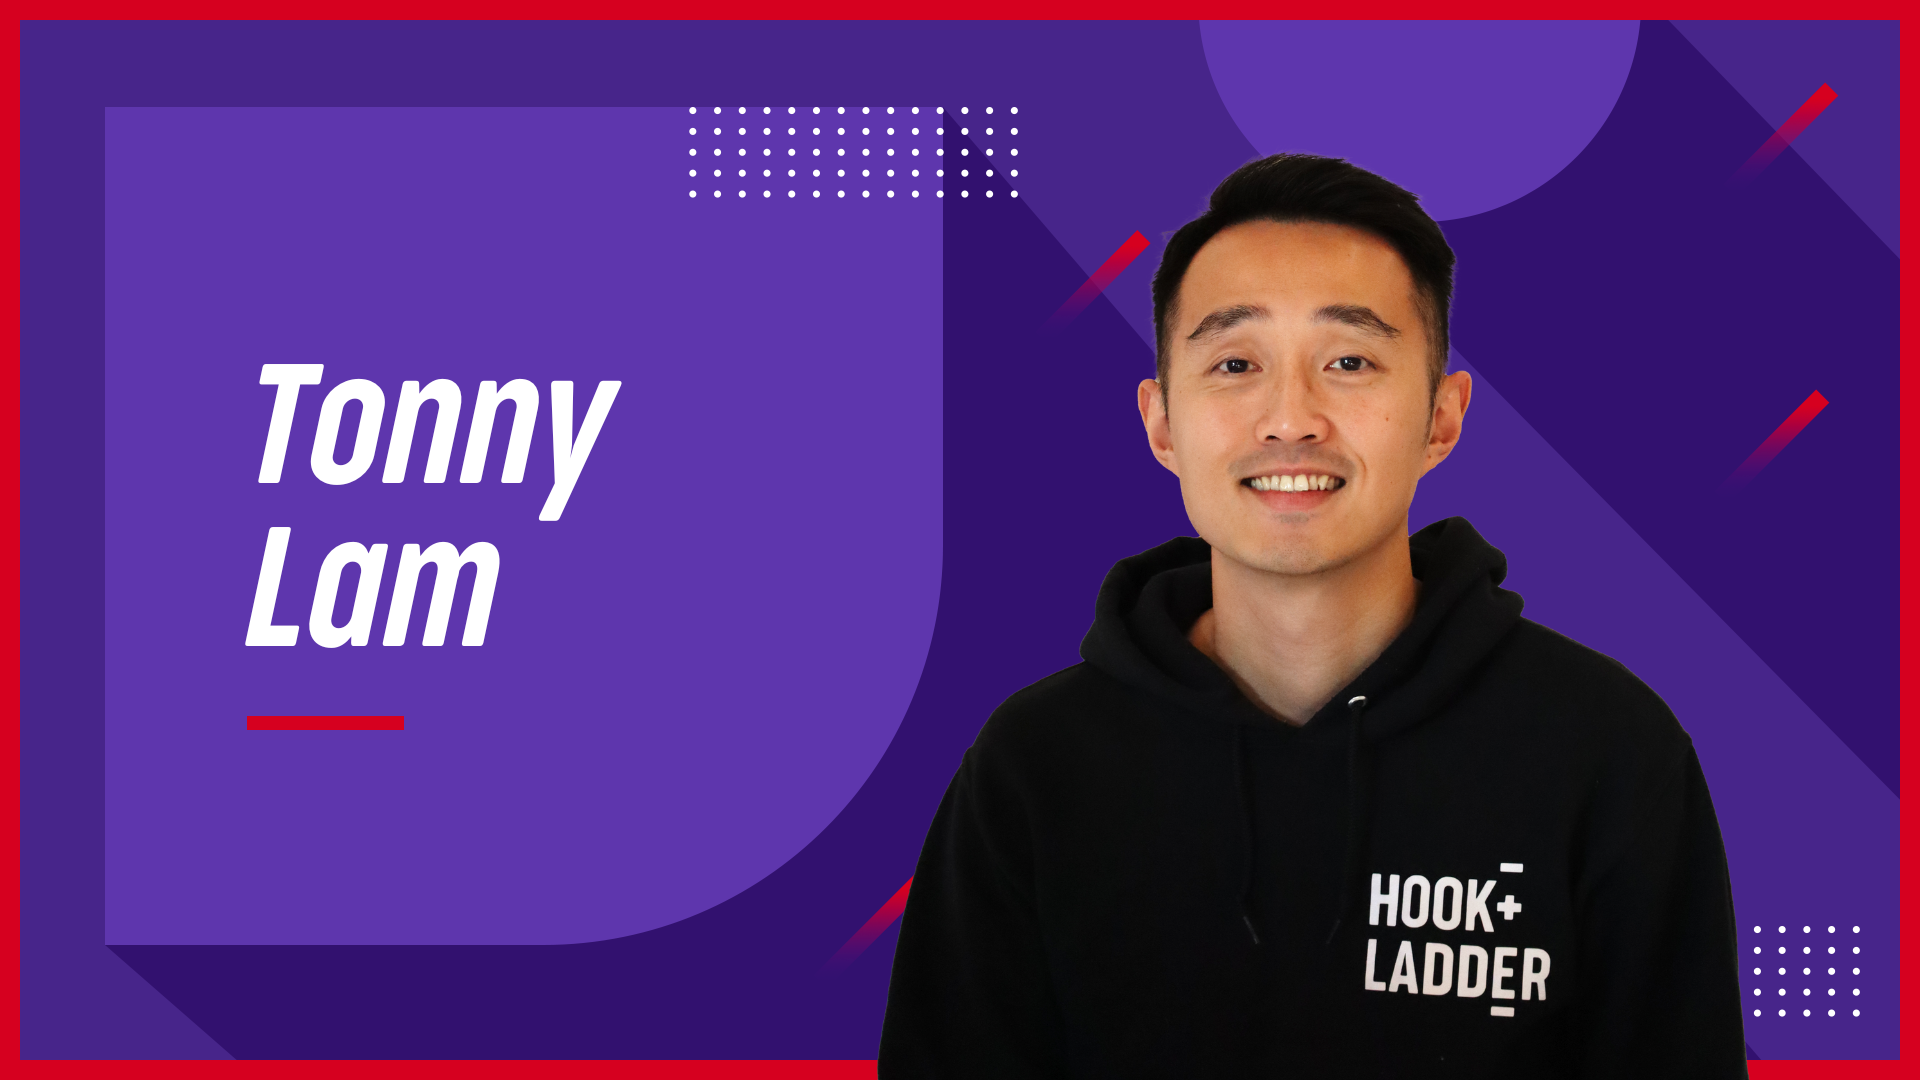 Growth League Podcast: S3E22 - Tonny Lam, President & CEO of Hook + Ladder